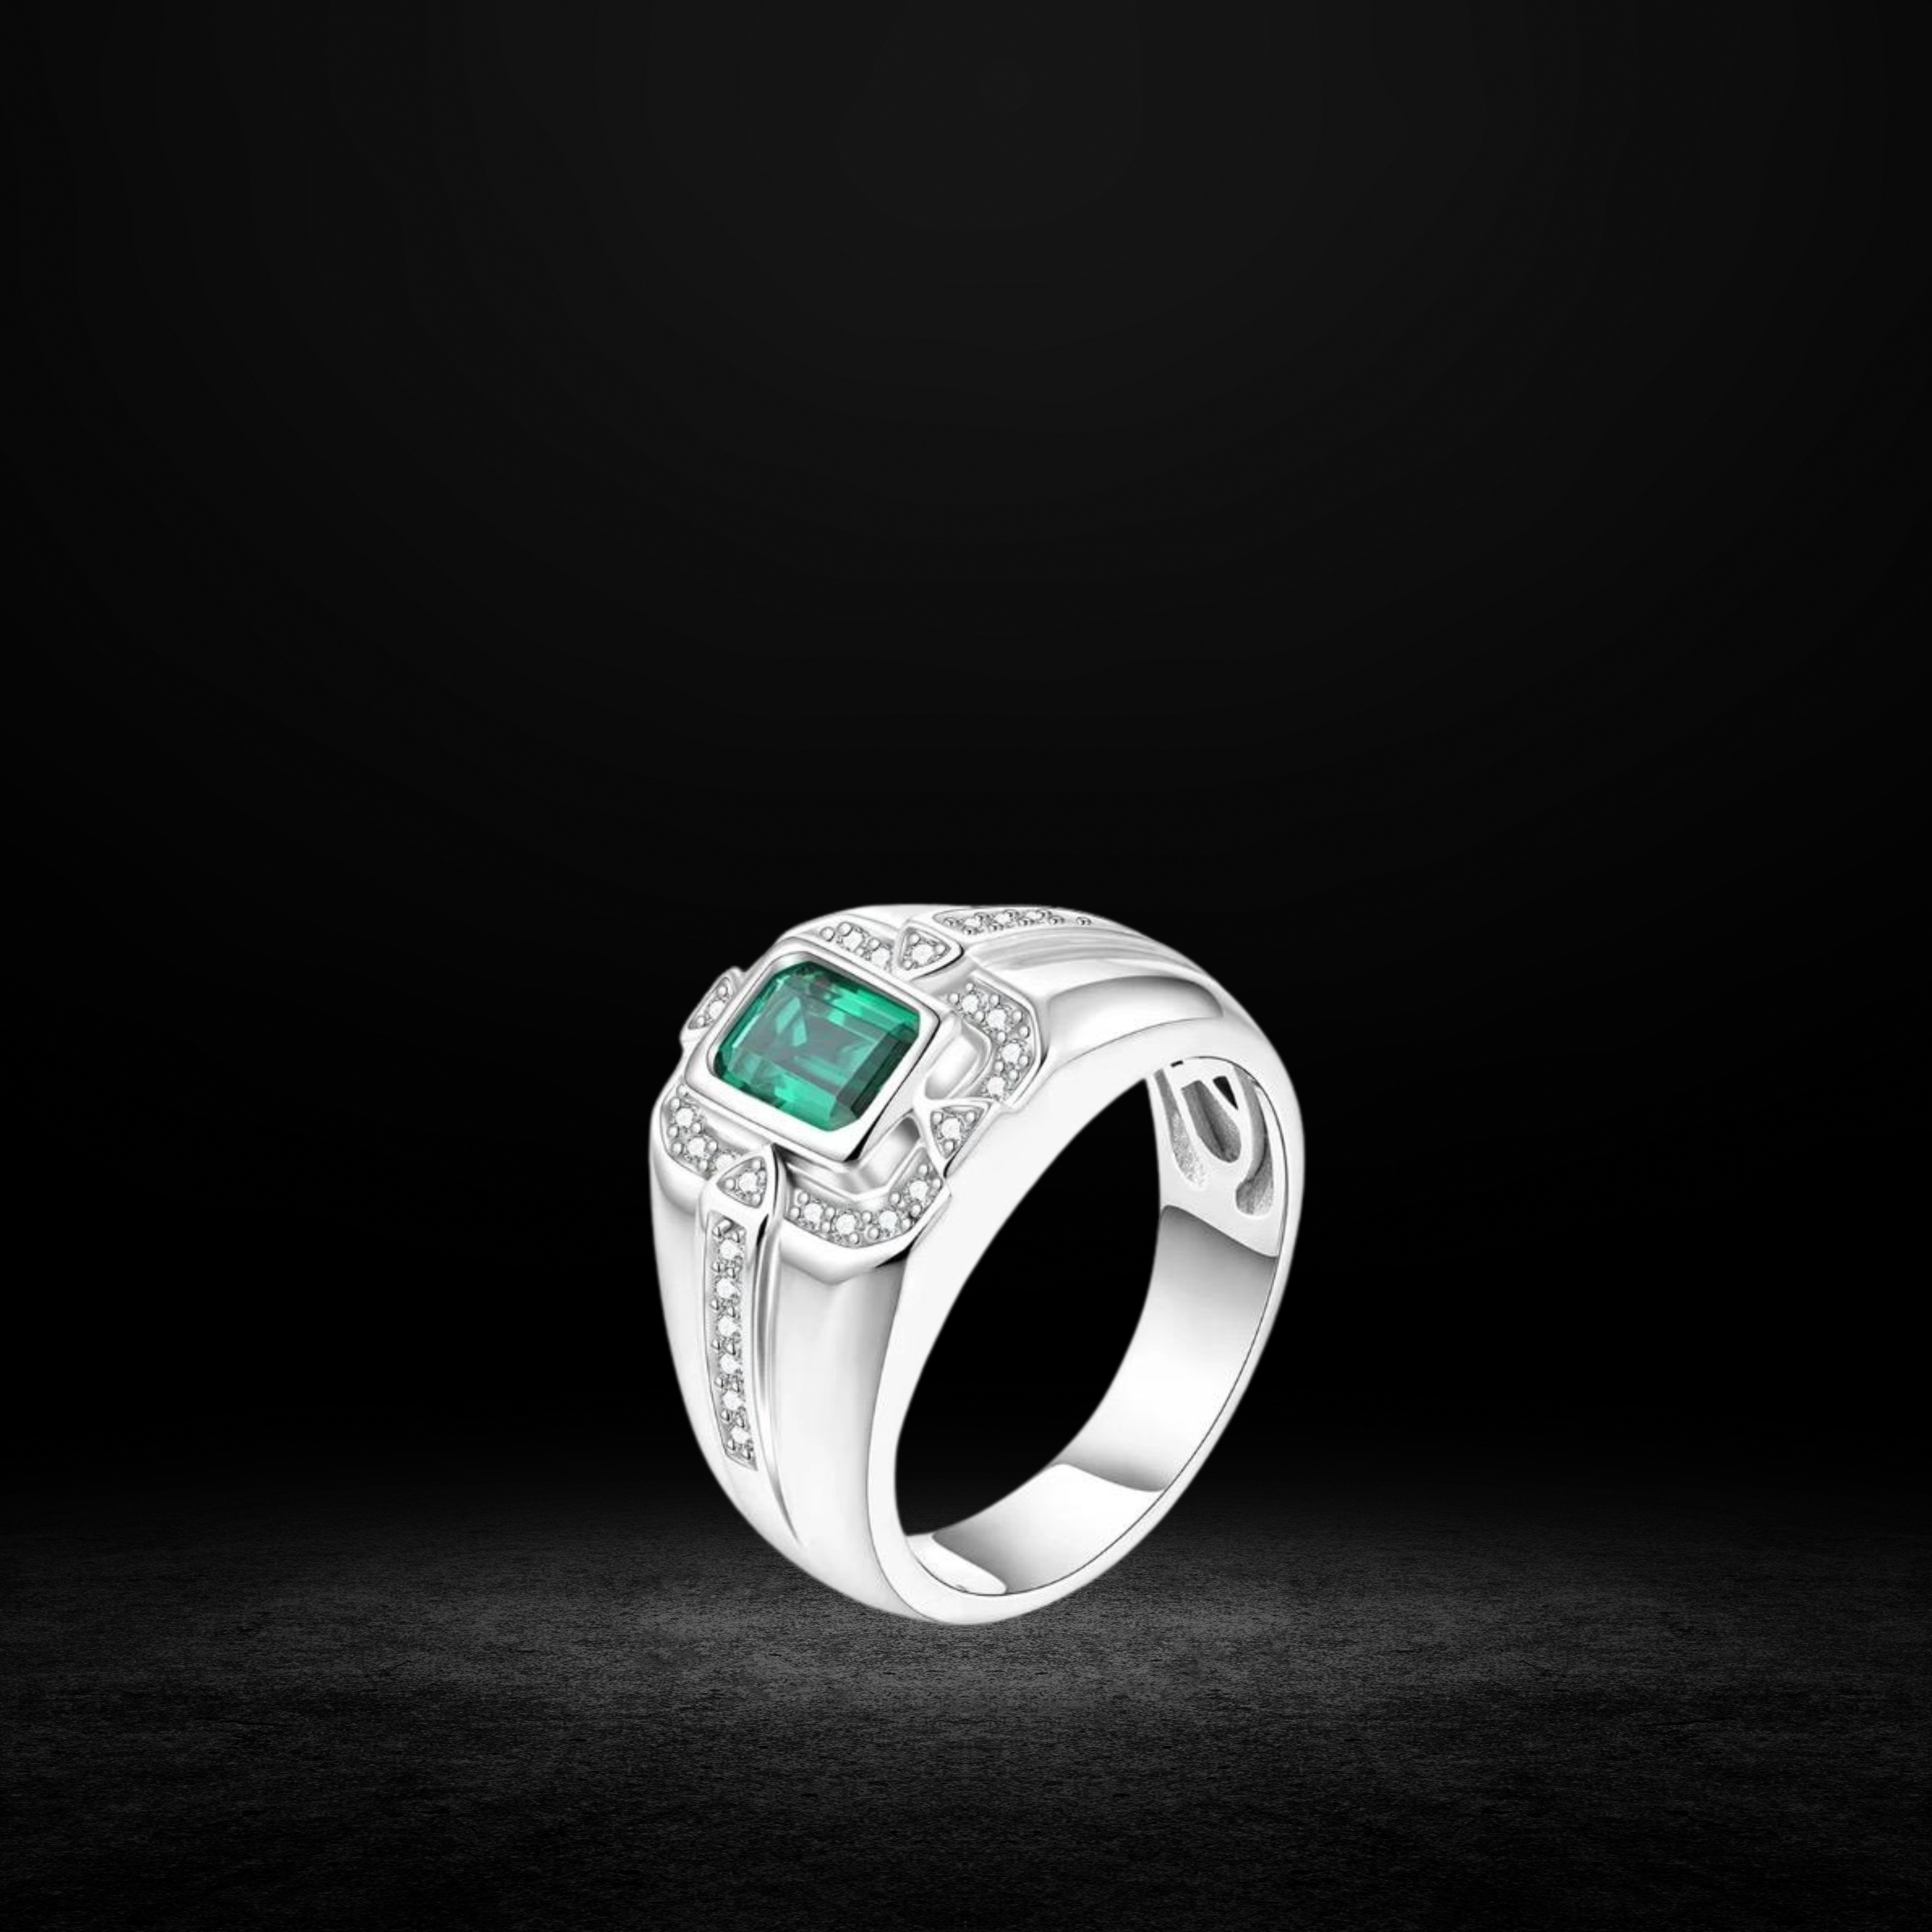 THE OCTAGONAL EMERALD RING